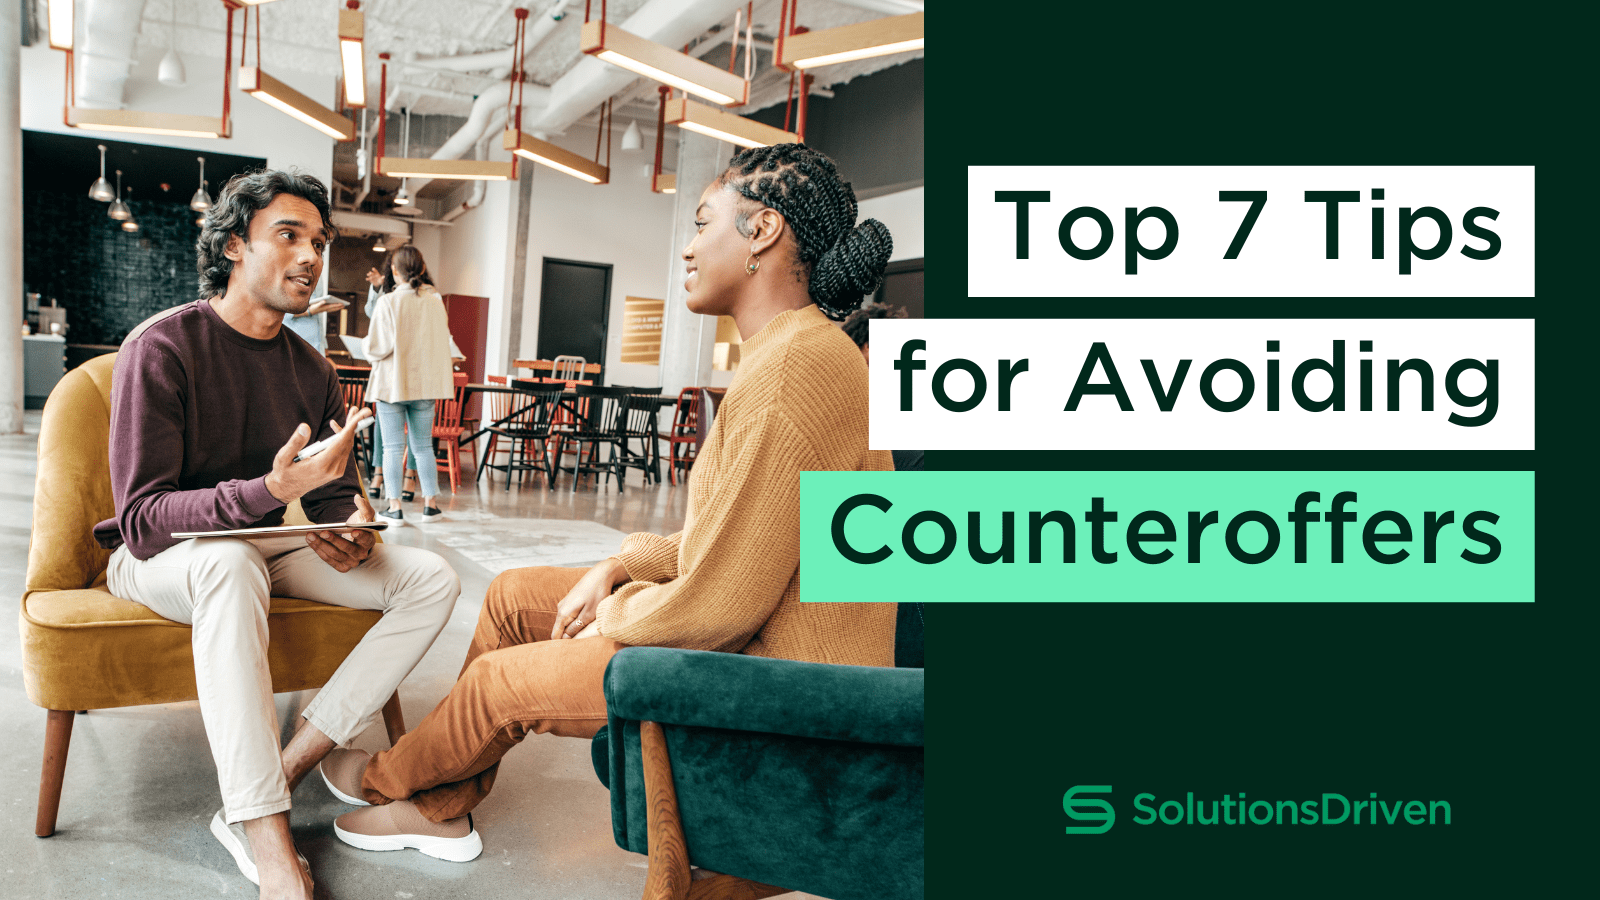 Top 7 Tips for Avoiding Counteroffers